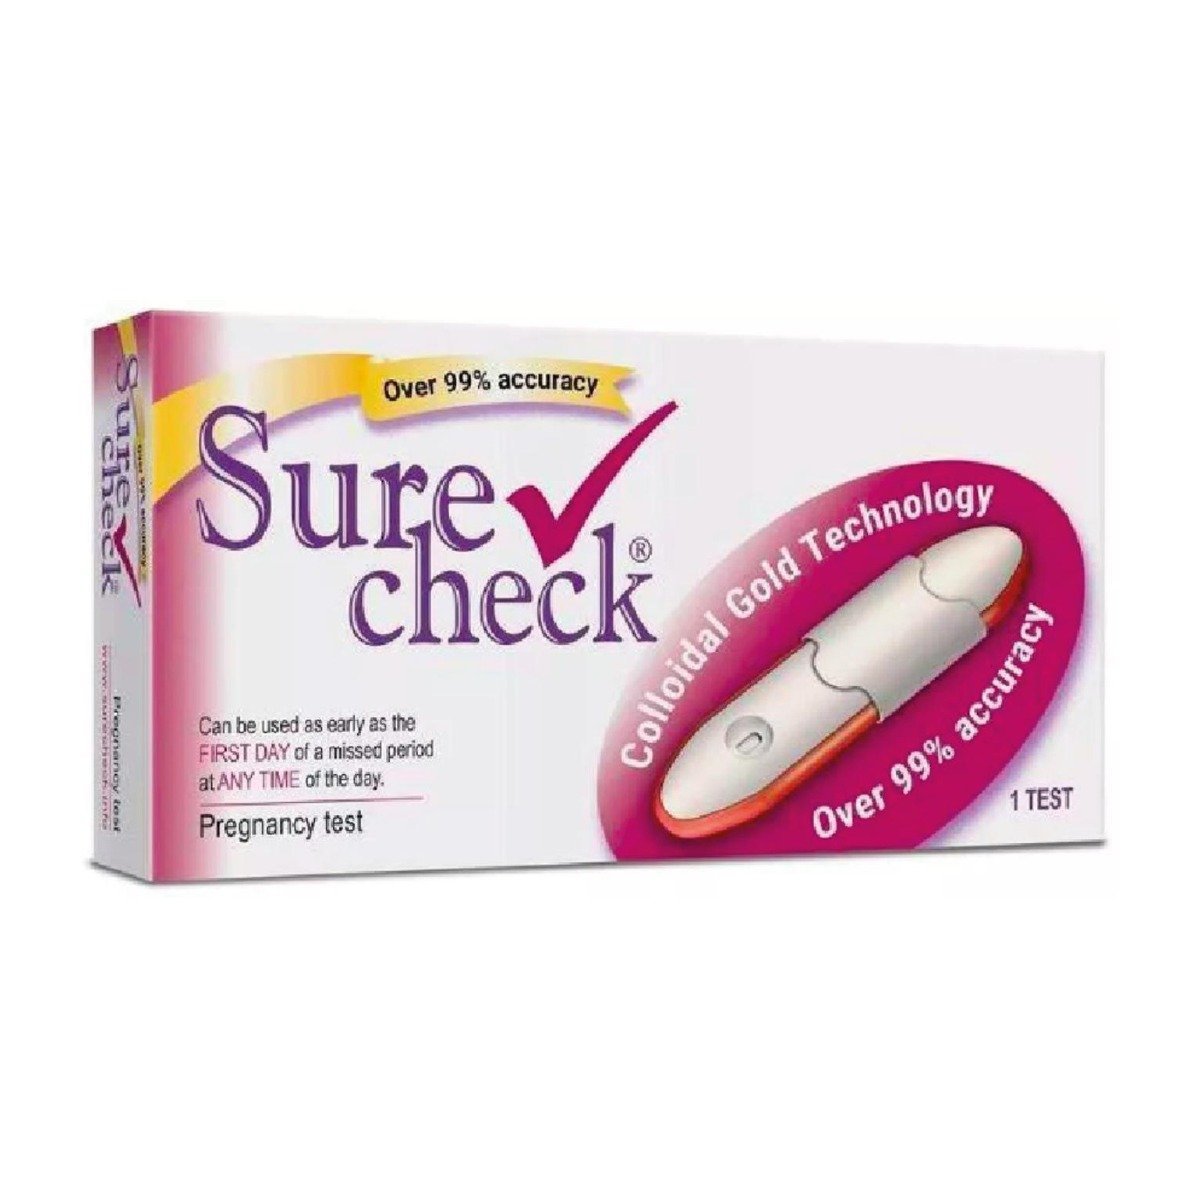 Sure Check Pregnancy Test - 1 test - Bloom Pharmacy